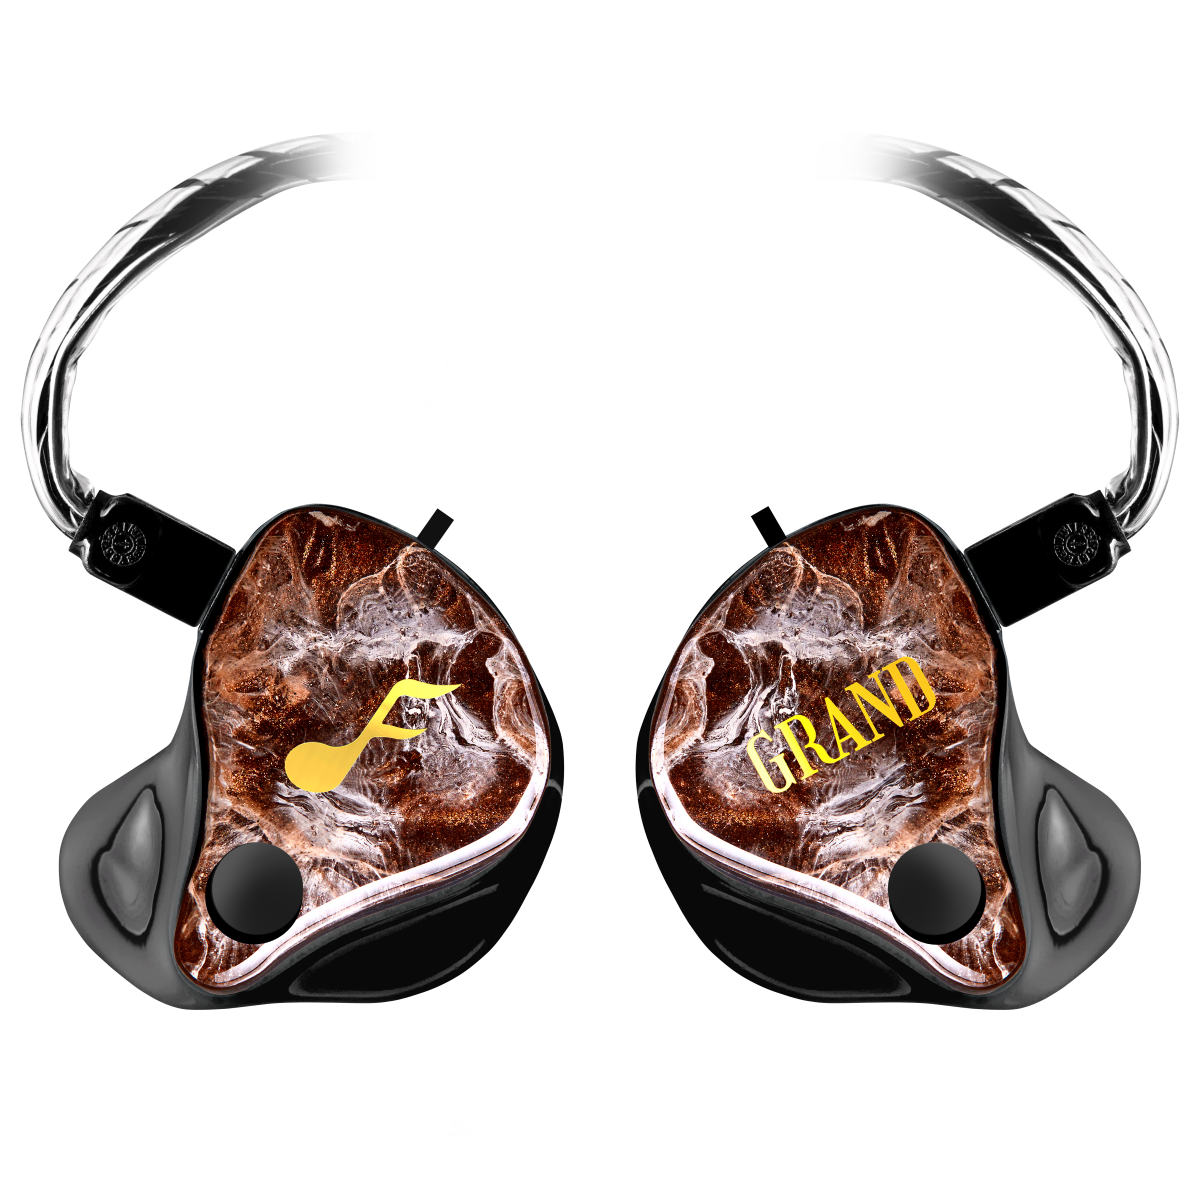 GRAND Maestro Custom IEM - Prices from 5676.00 to 5770.00